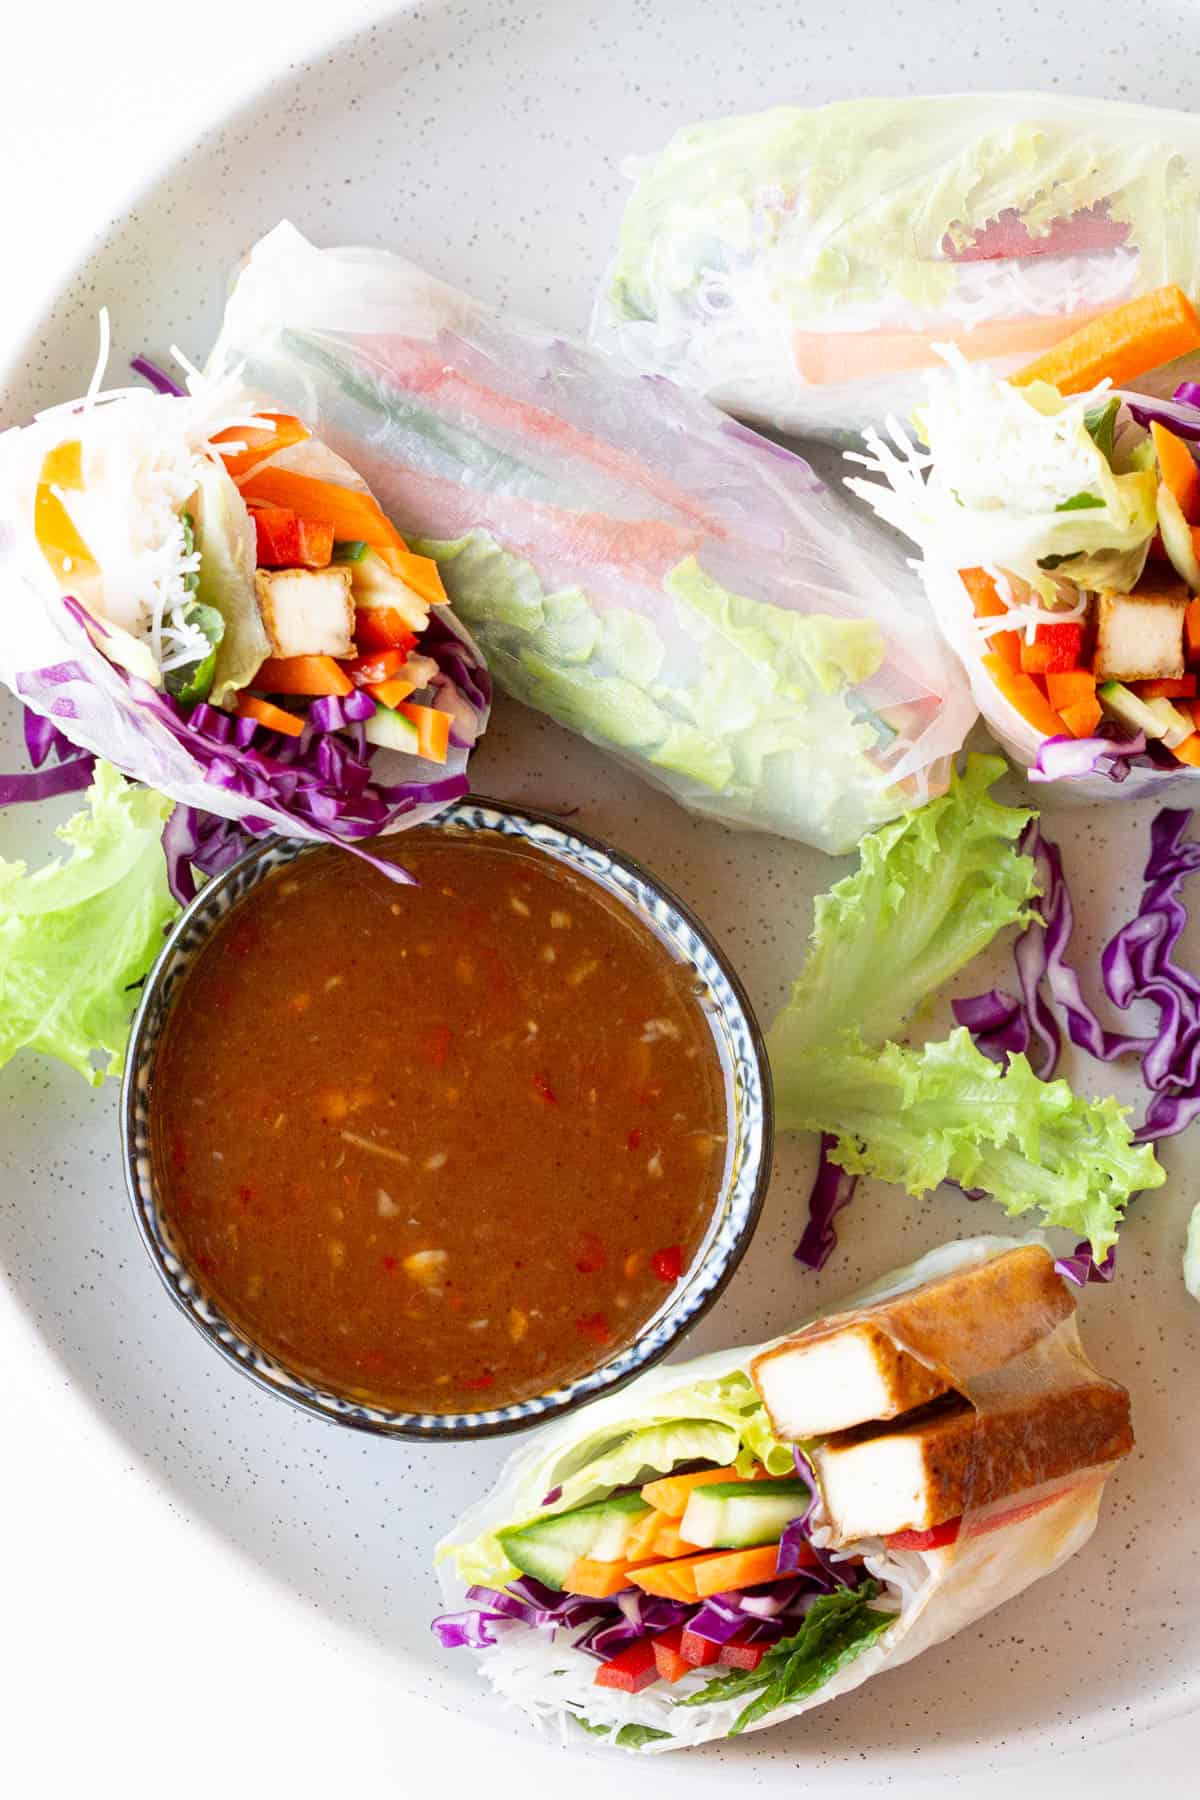 Rainbow rice paper rolls surround a dish of tamarind dipping sauce.